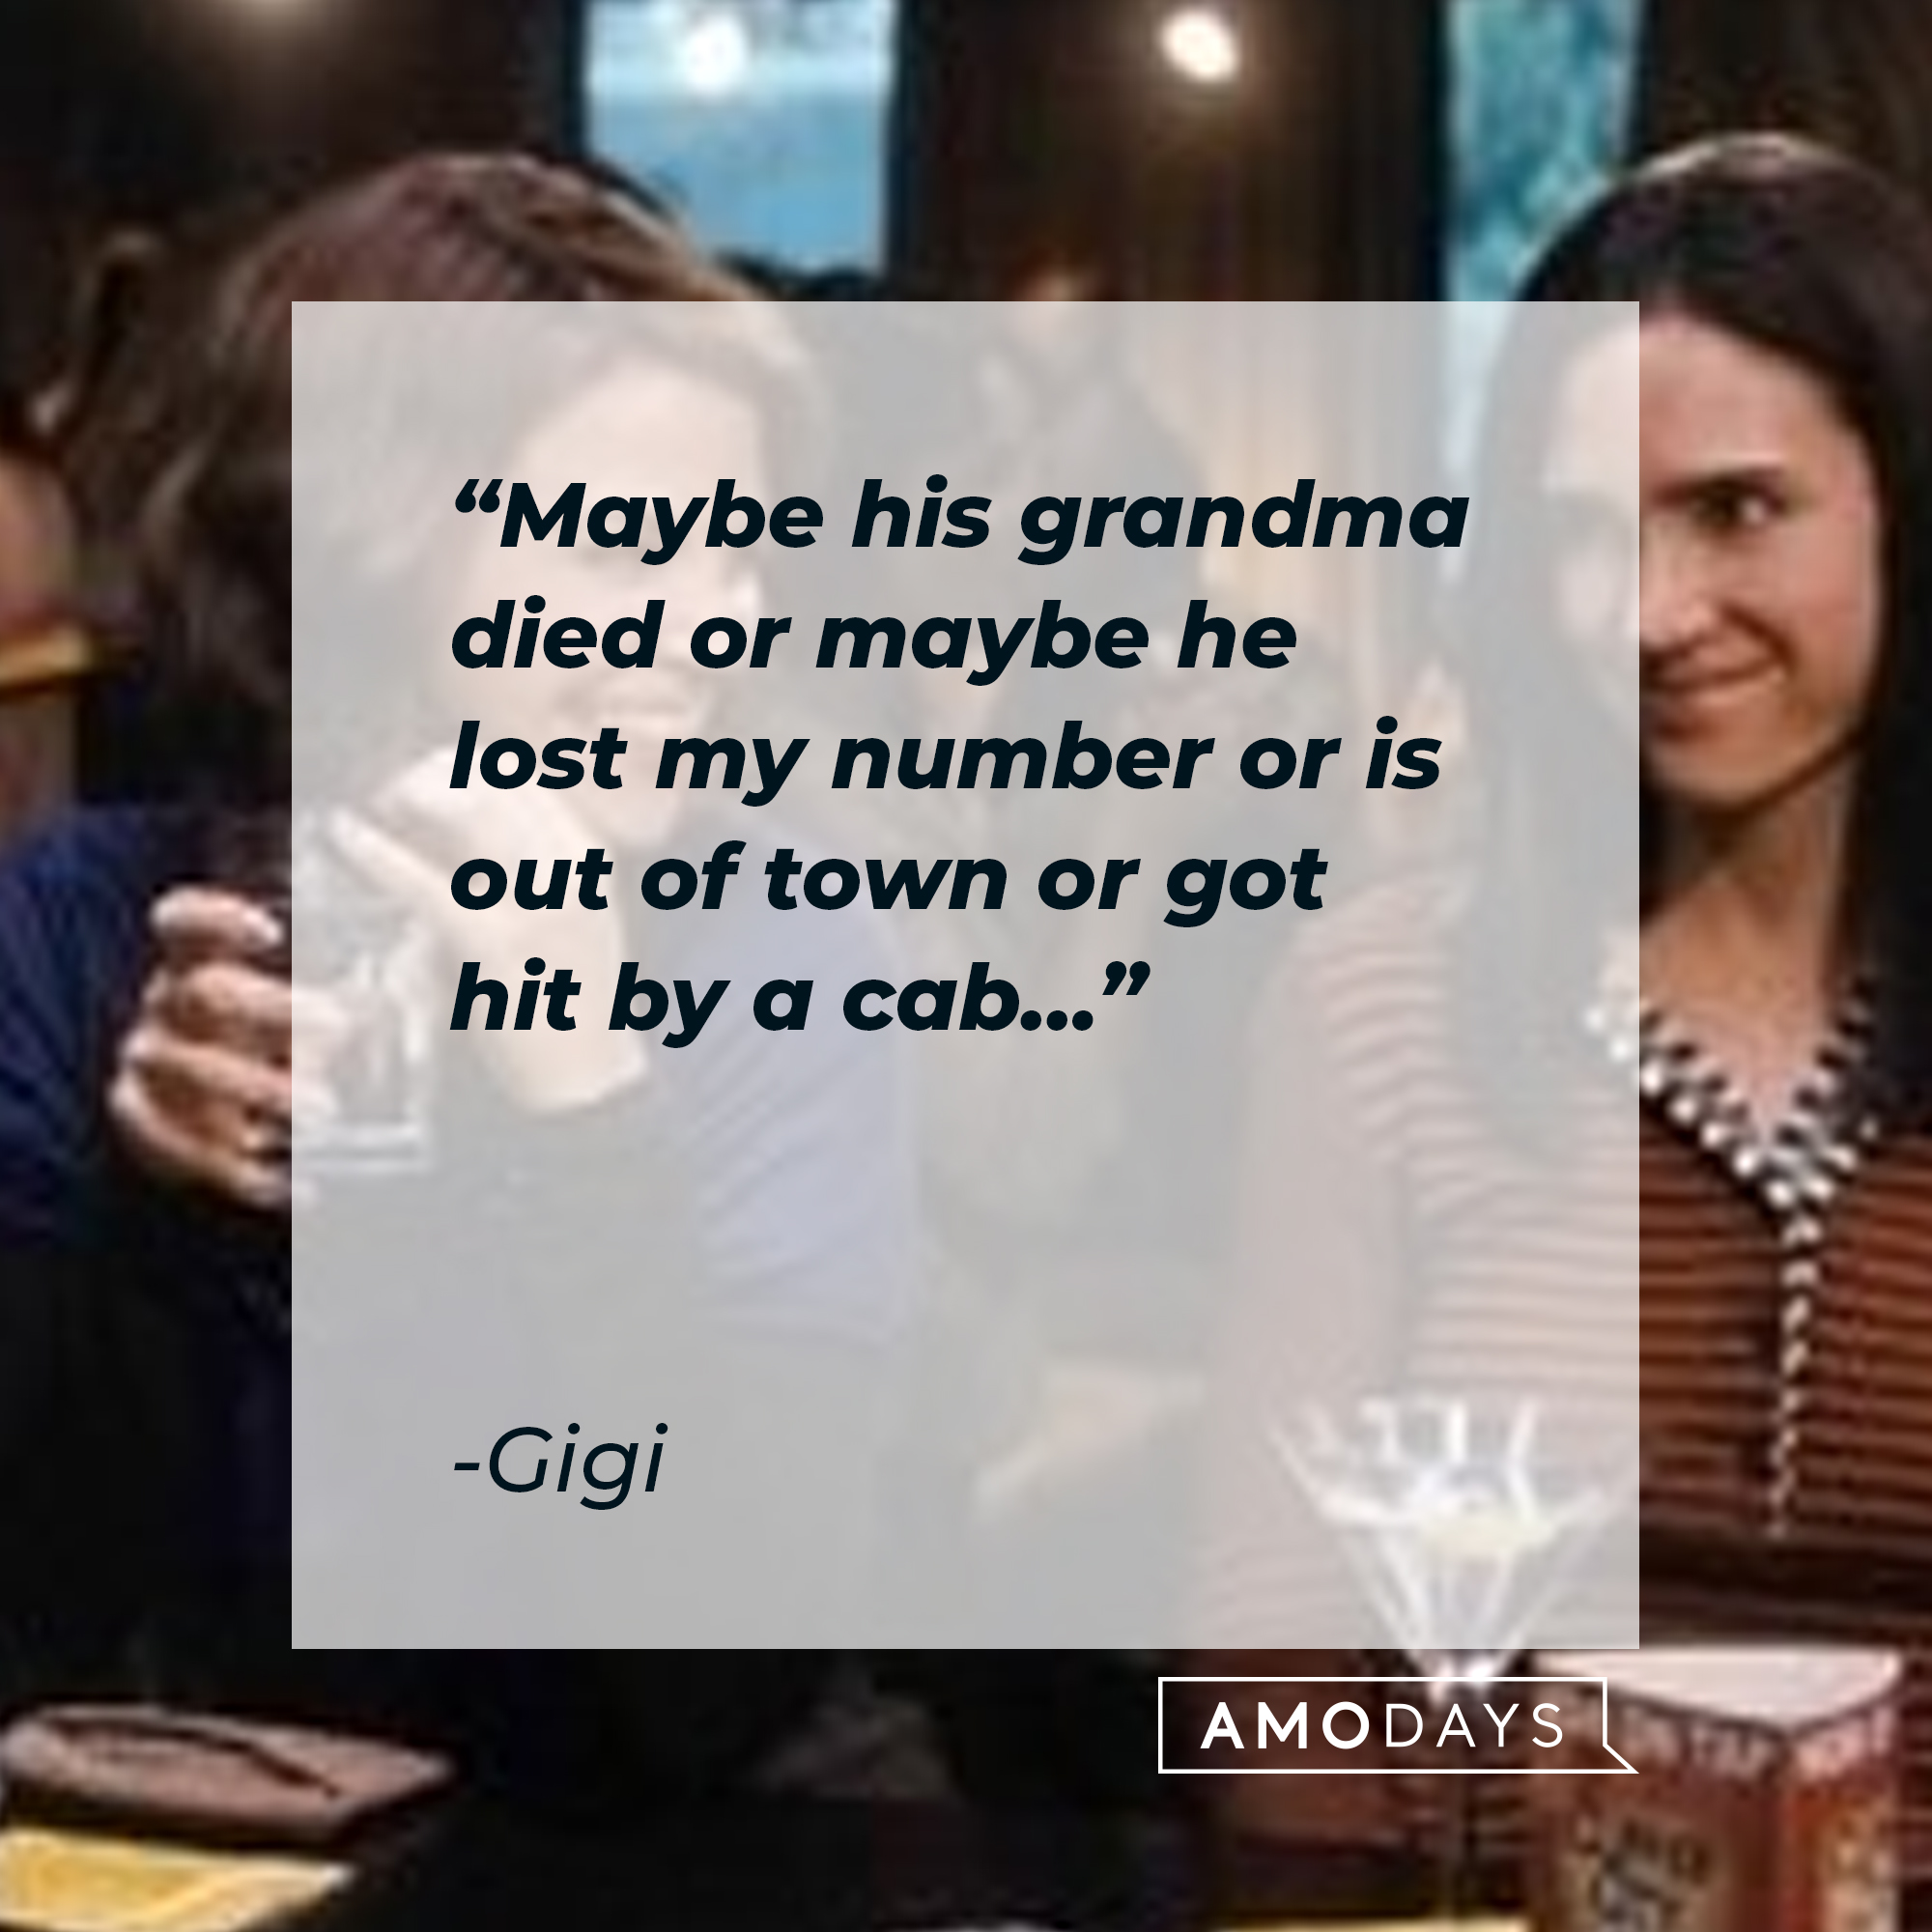 Gigi's quote: "Maybe his grandma died or maybe he lost my number or is out of town or got hit by a cab..." | Source: Facebook/hesjustnotthatintoyou